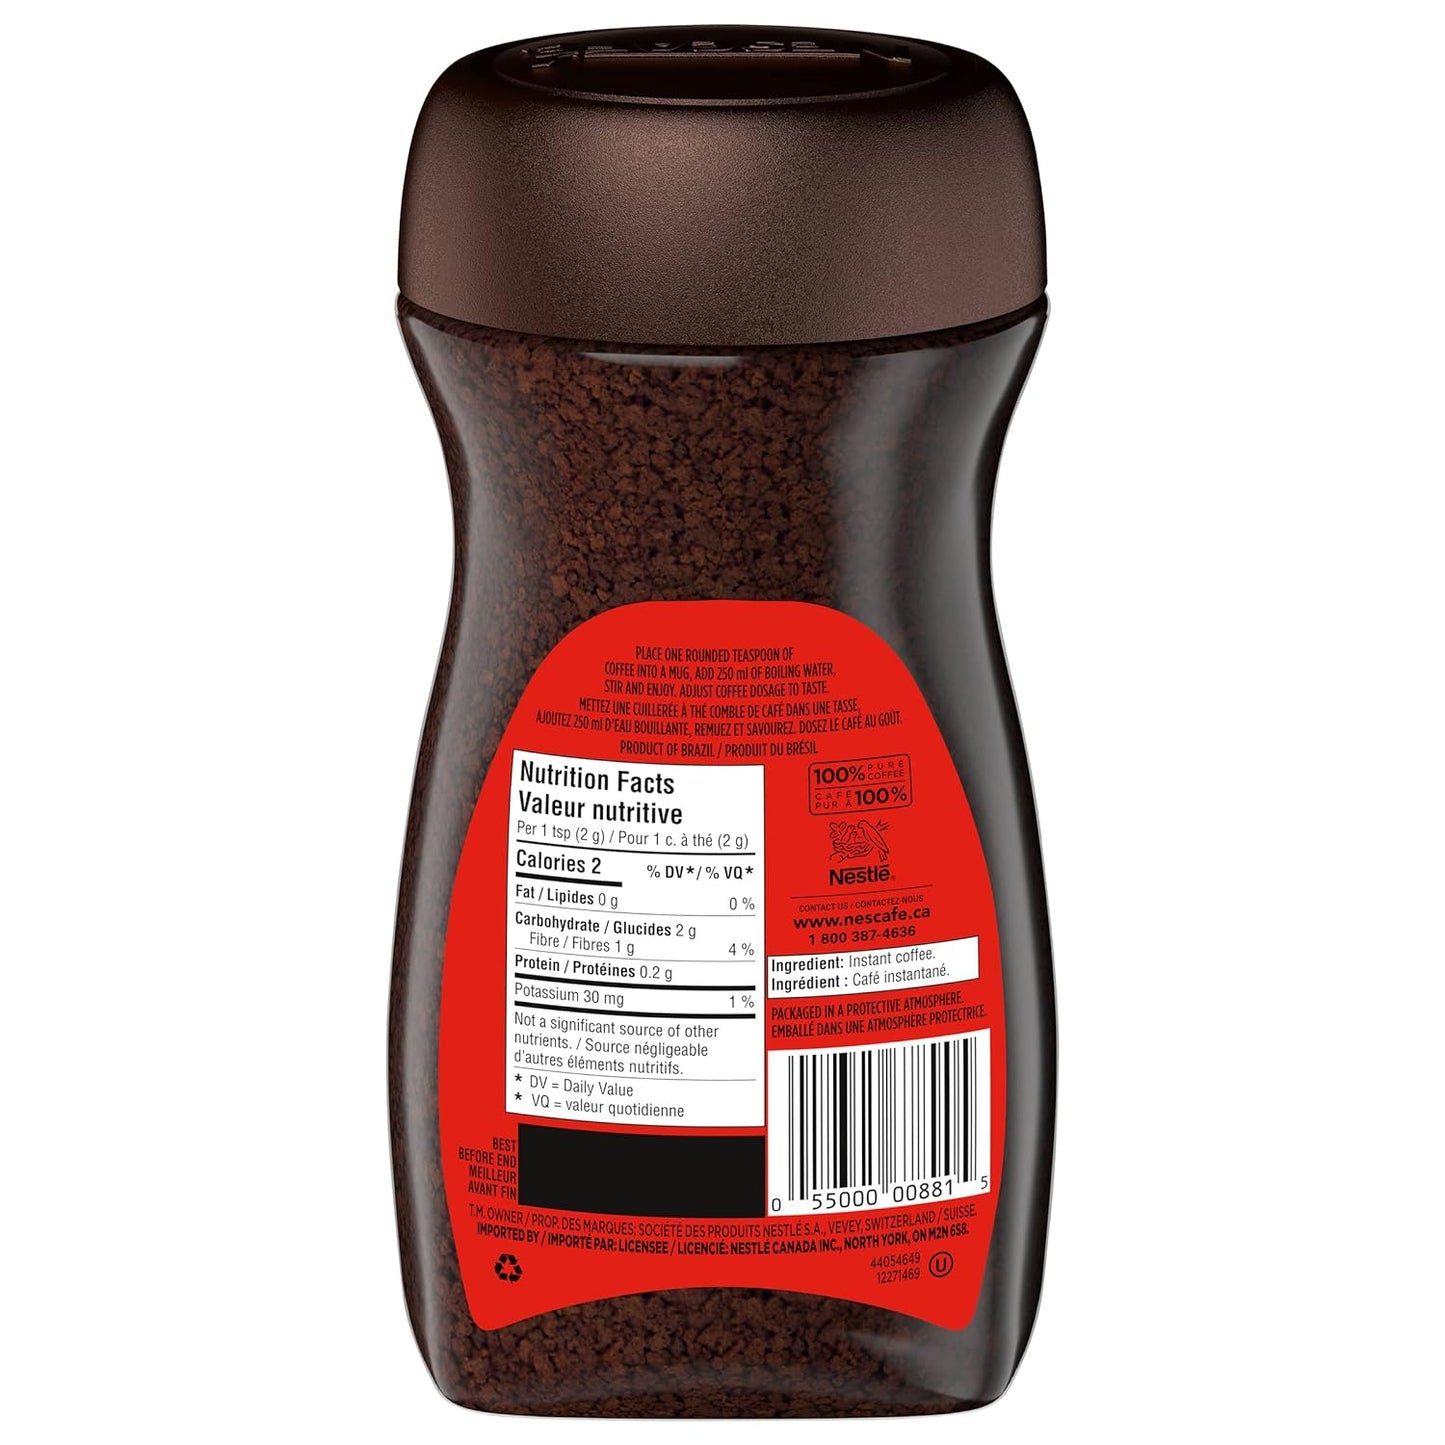 Nescafe Rich Instant Coffee 170g/6oz (Shipped from Canada)